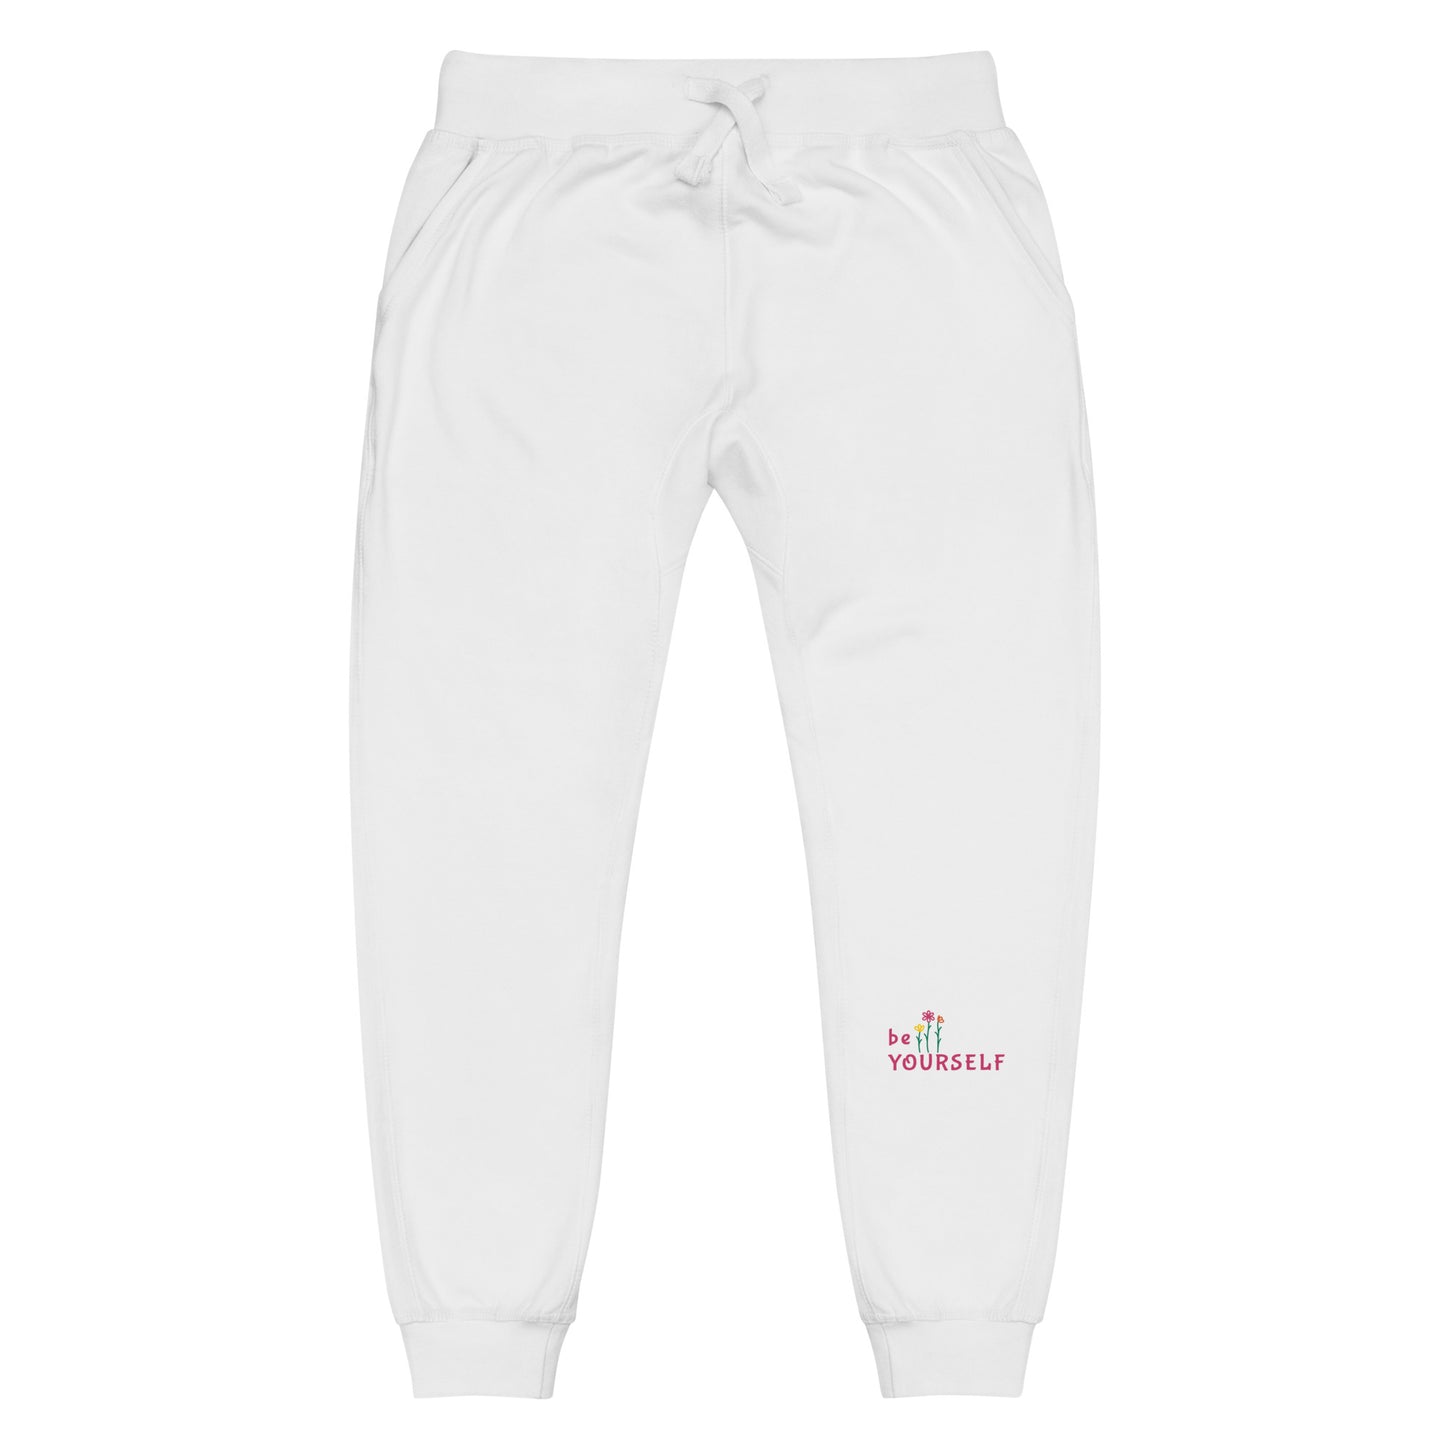 be yourself - printed and embroidered unisex fleece sweatpants by the banannie diaries